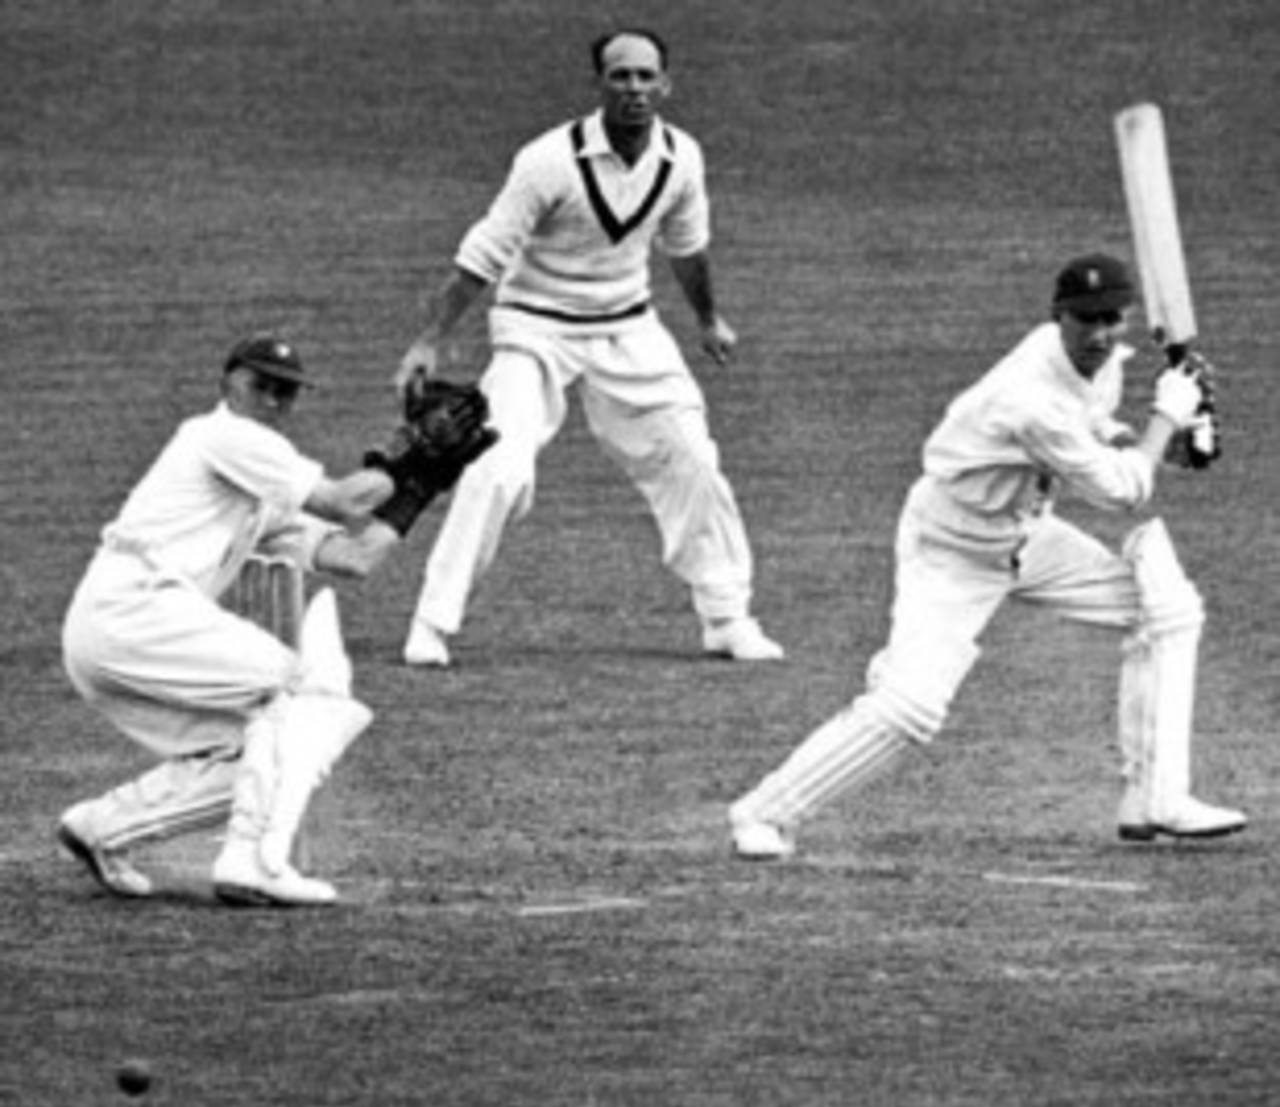 Len Hutton nudges the ball behind square, England v Australia, 5th Test, The Oval, 3rd day, August 23, 1938